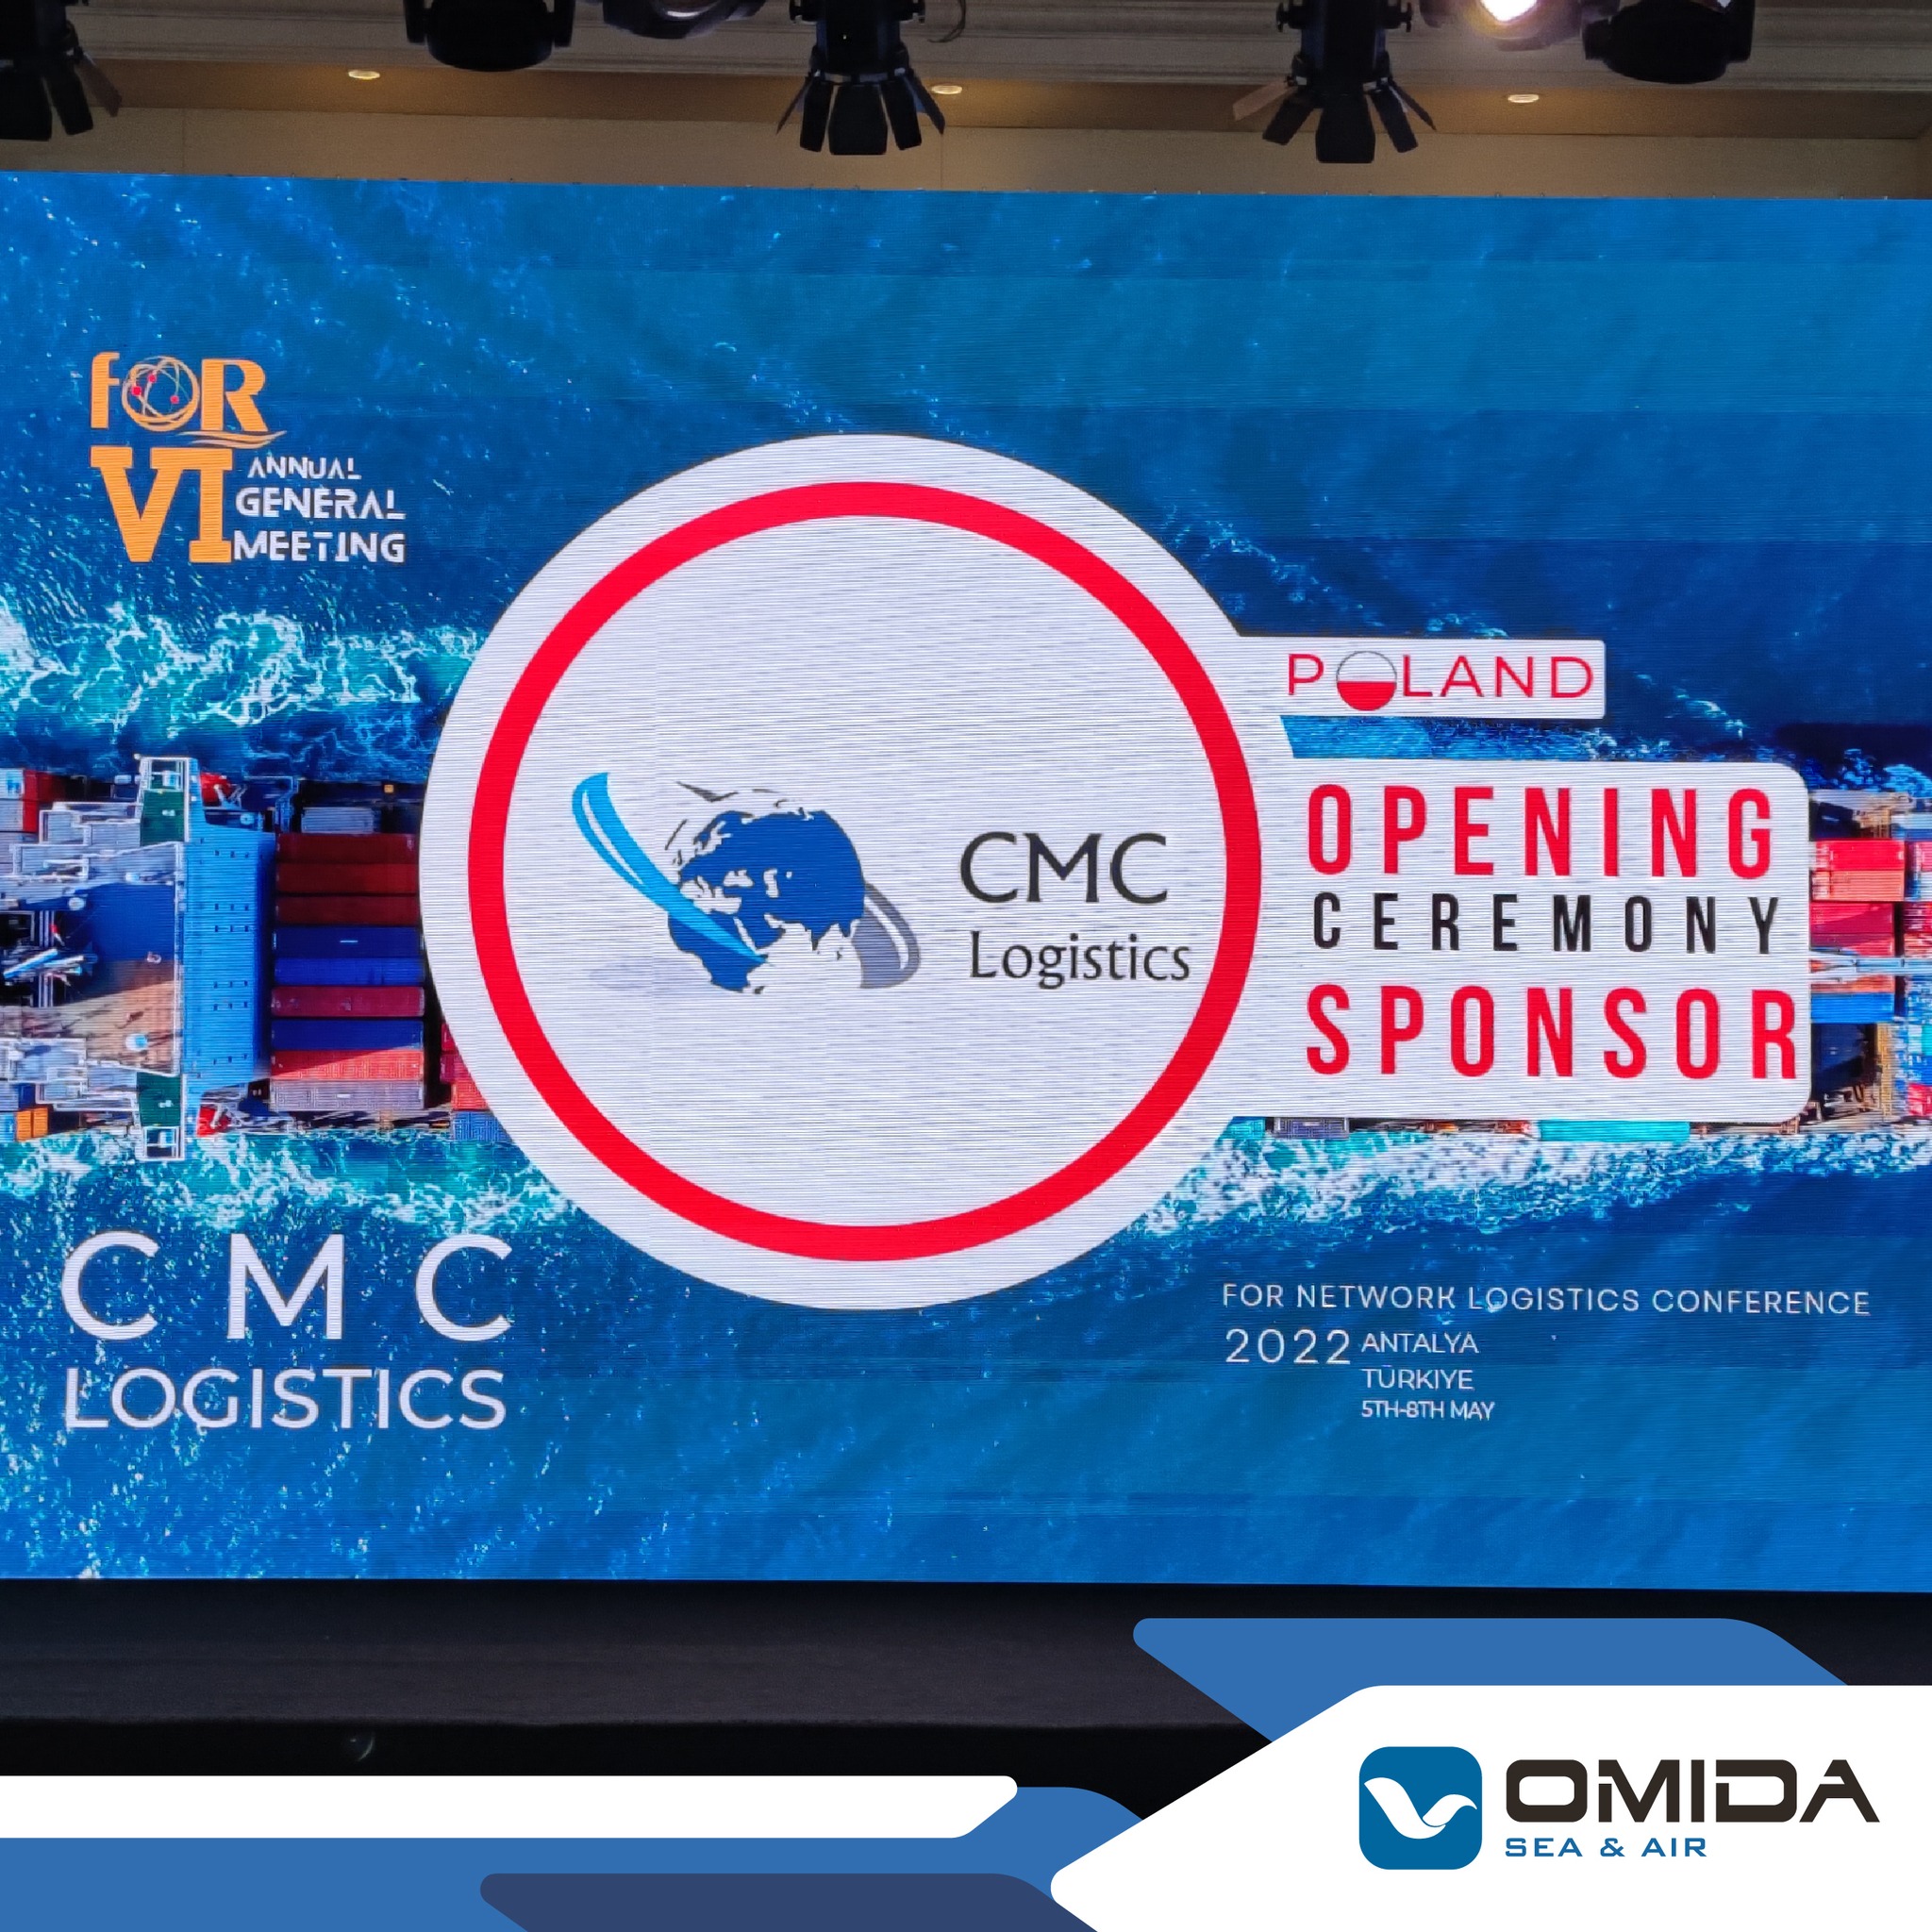 For Network Logistics Conference 2022 | Omida Sea And Air S.A.